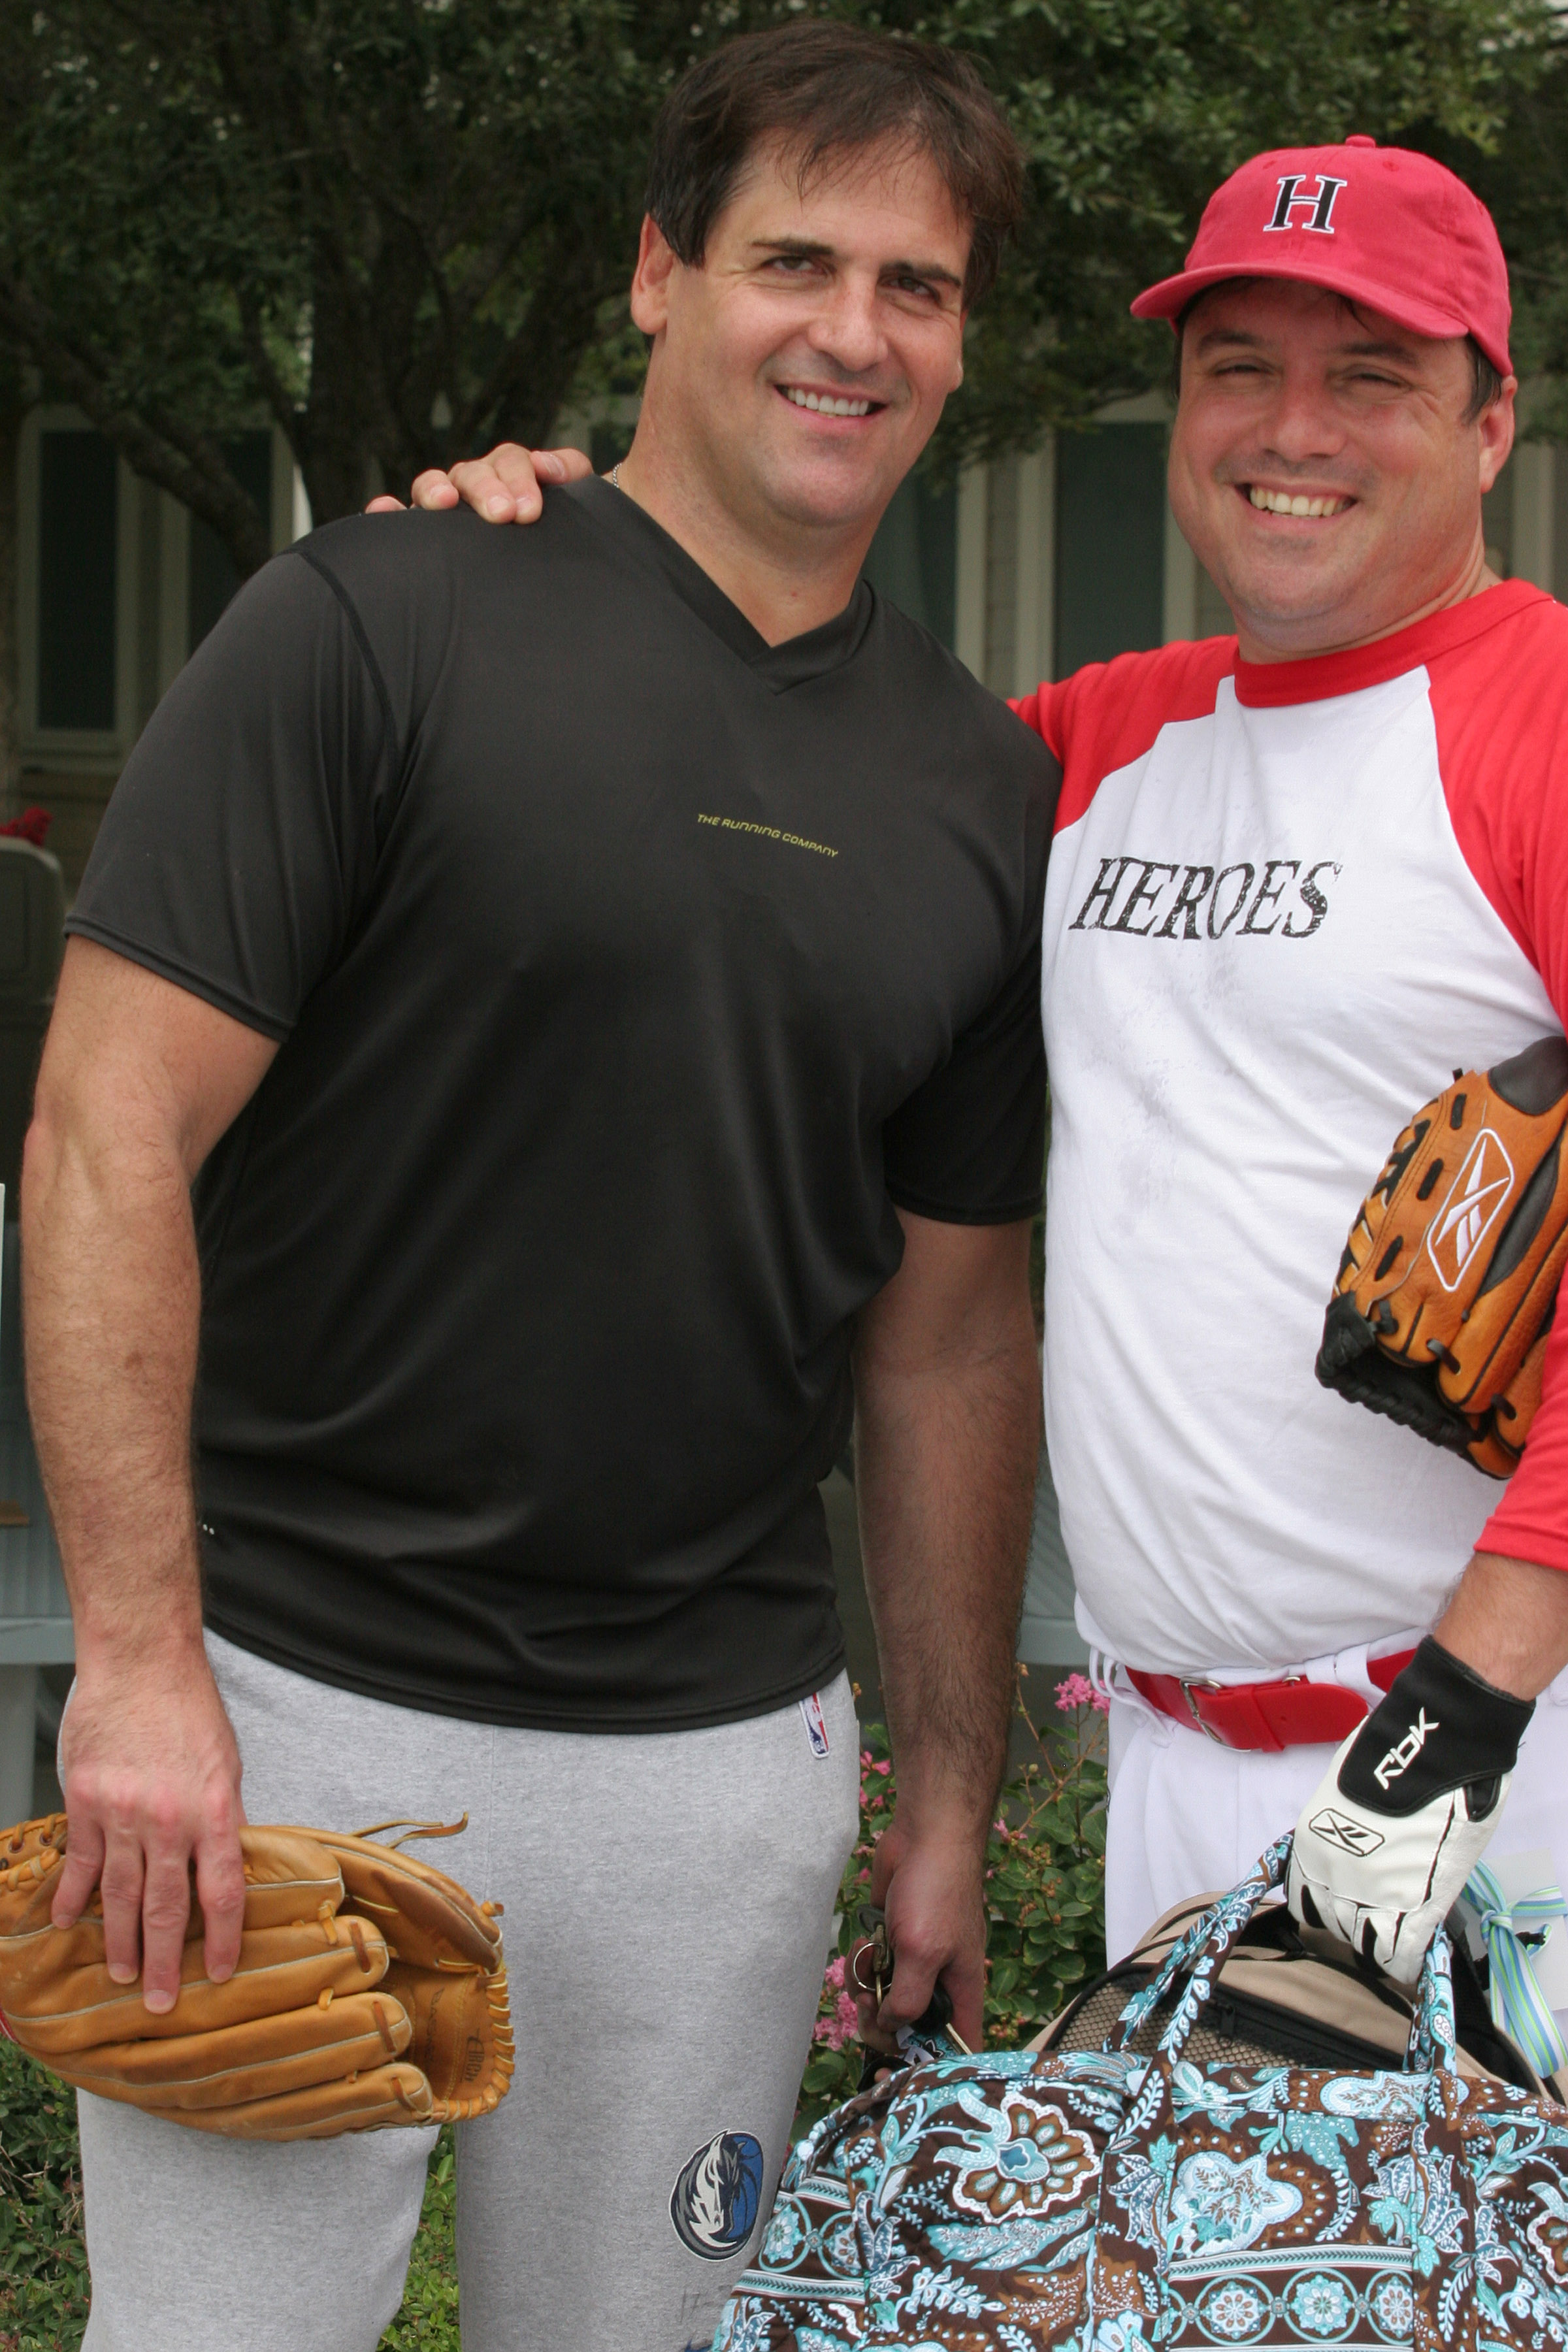 Mark Cuban and Danny Bollinger during Klein Creative Communications Provides Gift Bags at the 2006 Reebok Heroes Celebrity Baseball Game at Dr. Pepper Ballpark in Frisco, Texas, United States. (Photo by Peter Larsen/FilmMagic for Klein Creative Communications)